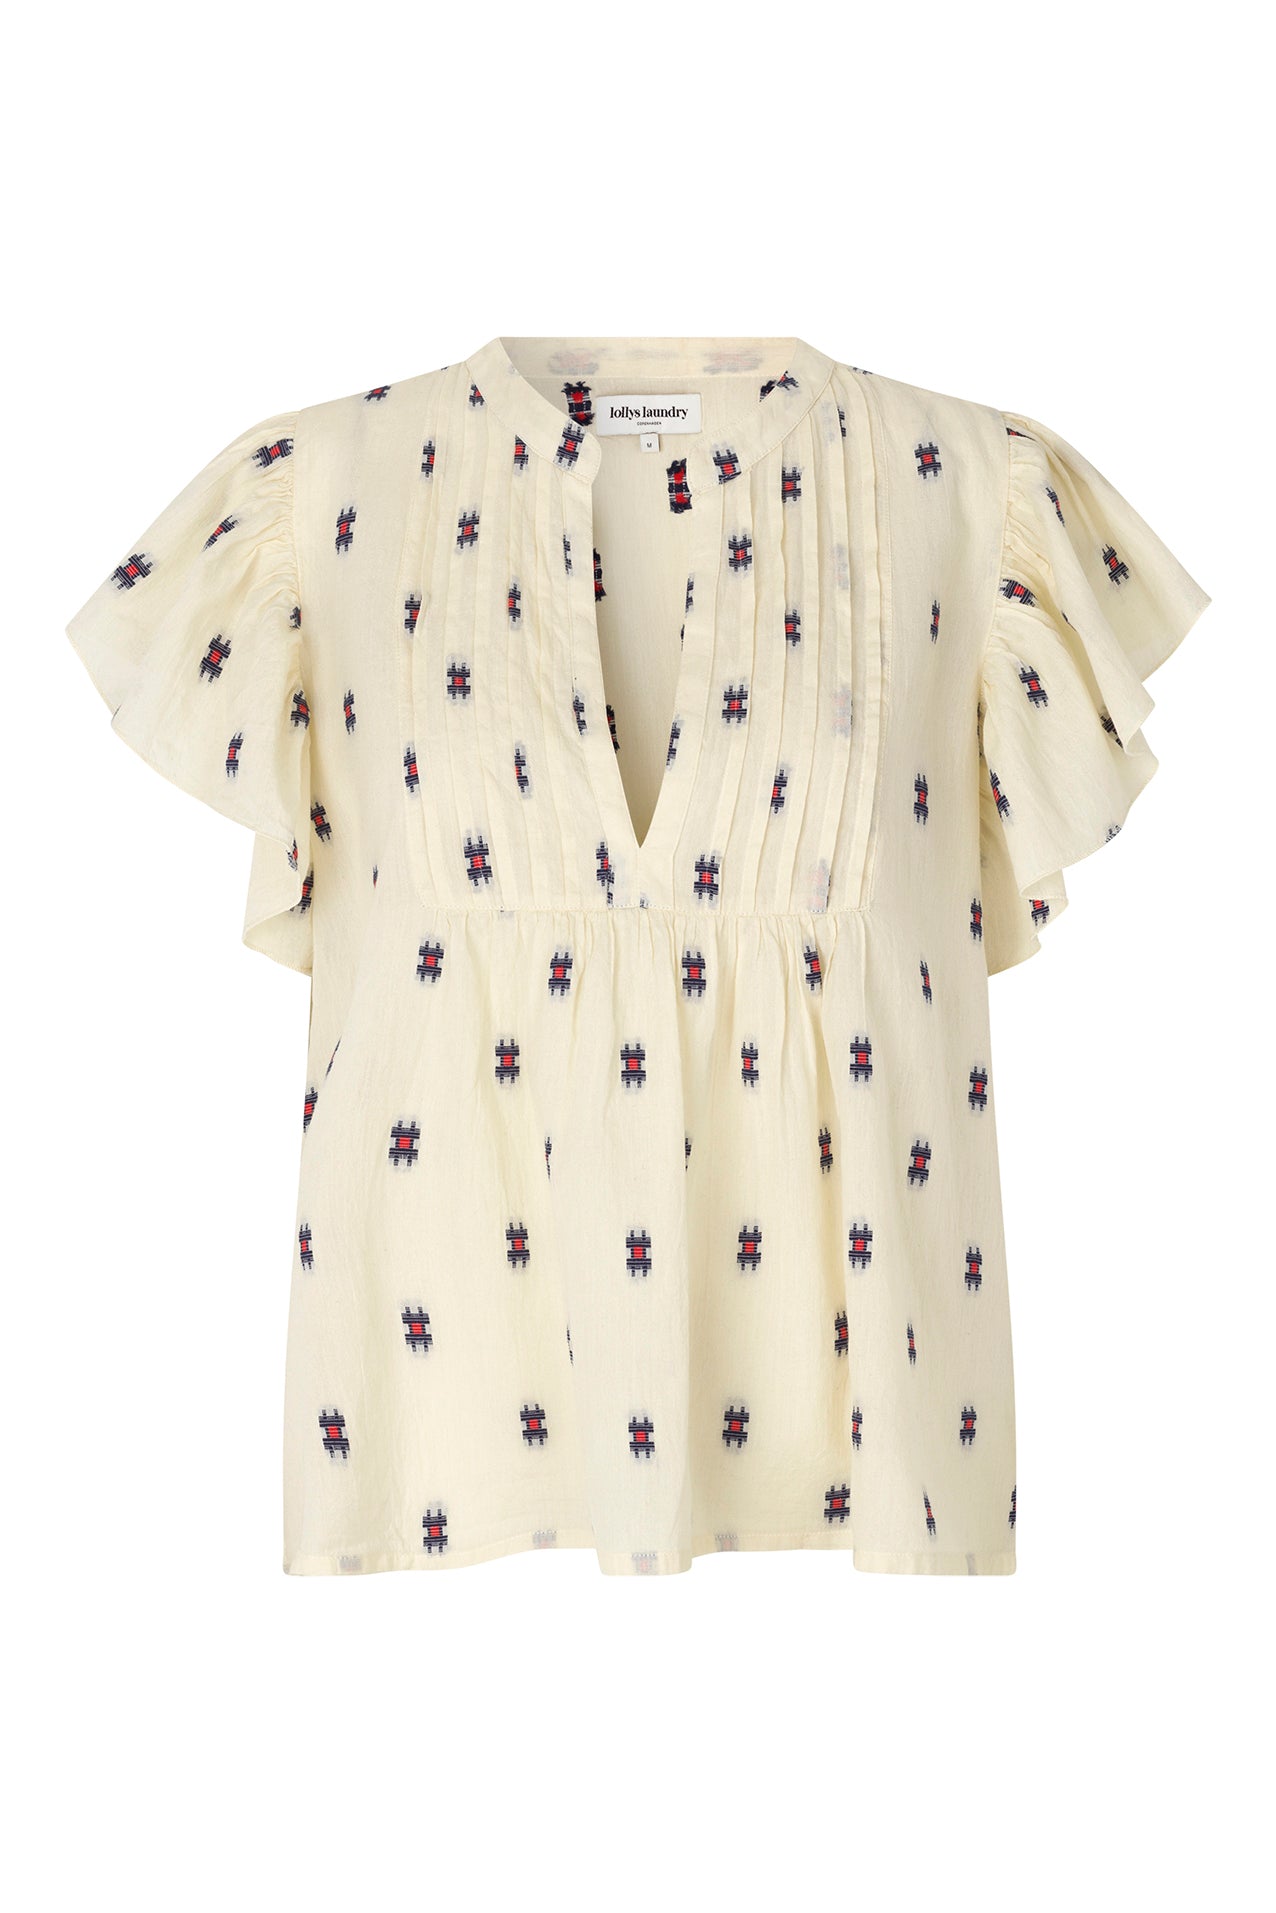 Lollys Laundry IsabelLL Top SL T-shirt 02 Creme